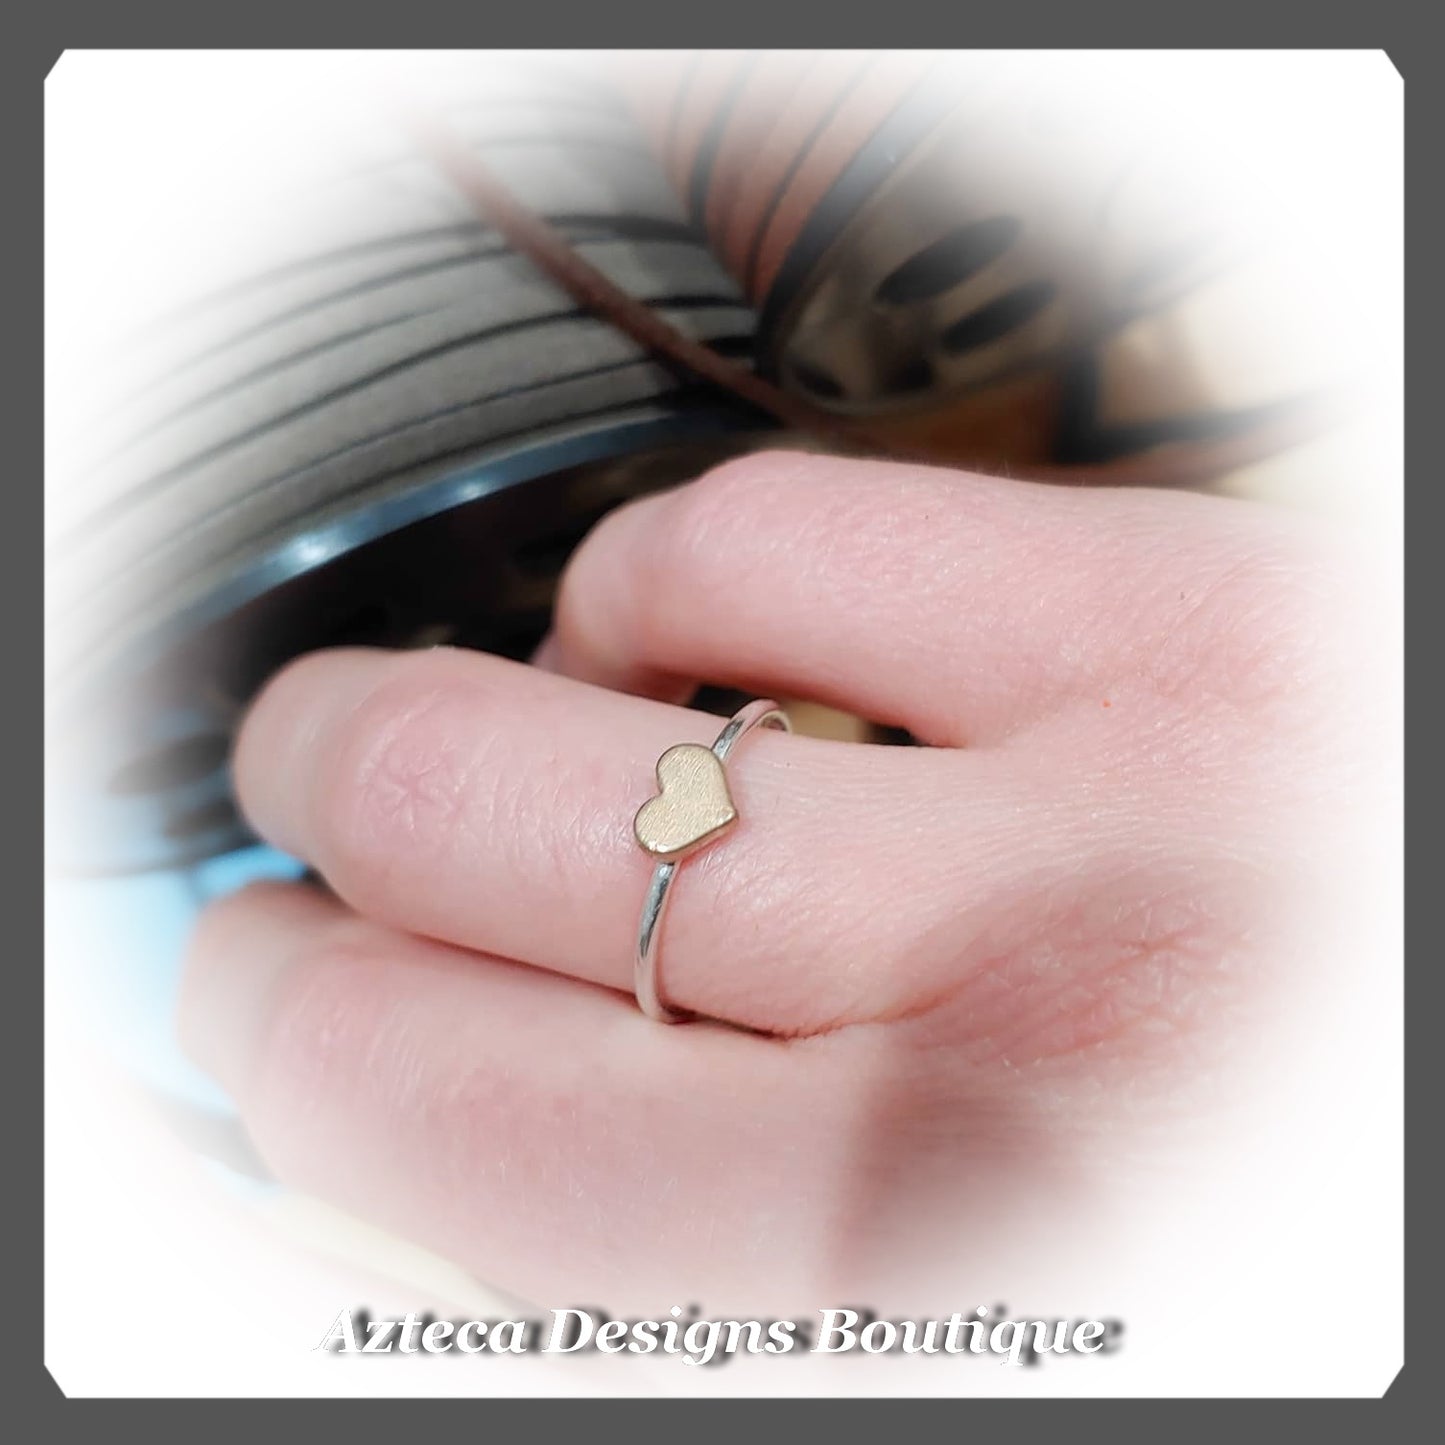 Made-to-Order Heart Ring Argentium Silver + Bronze + Petite